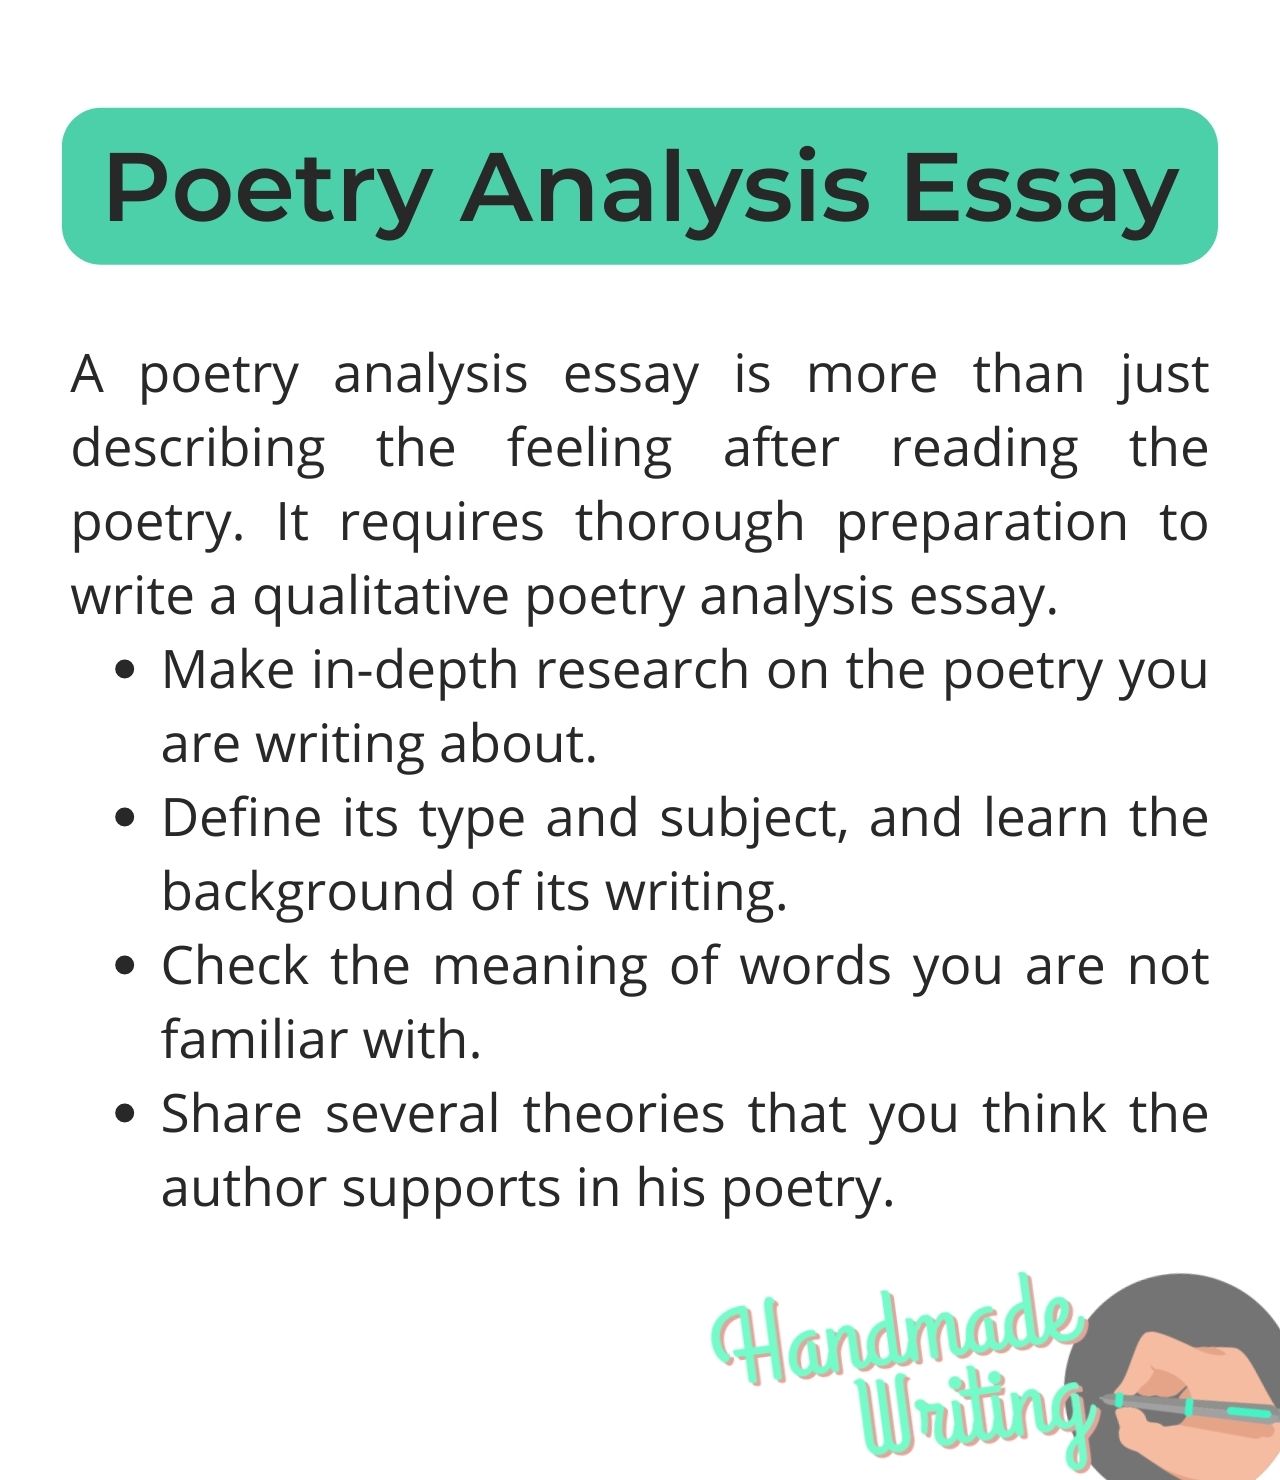 analytical essay on a poem example